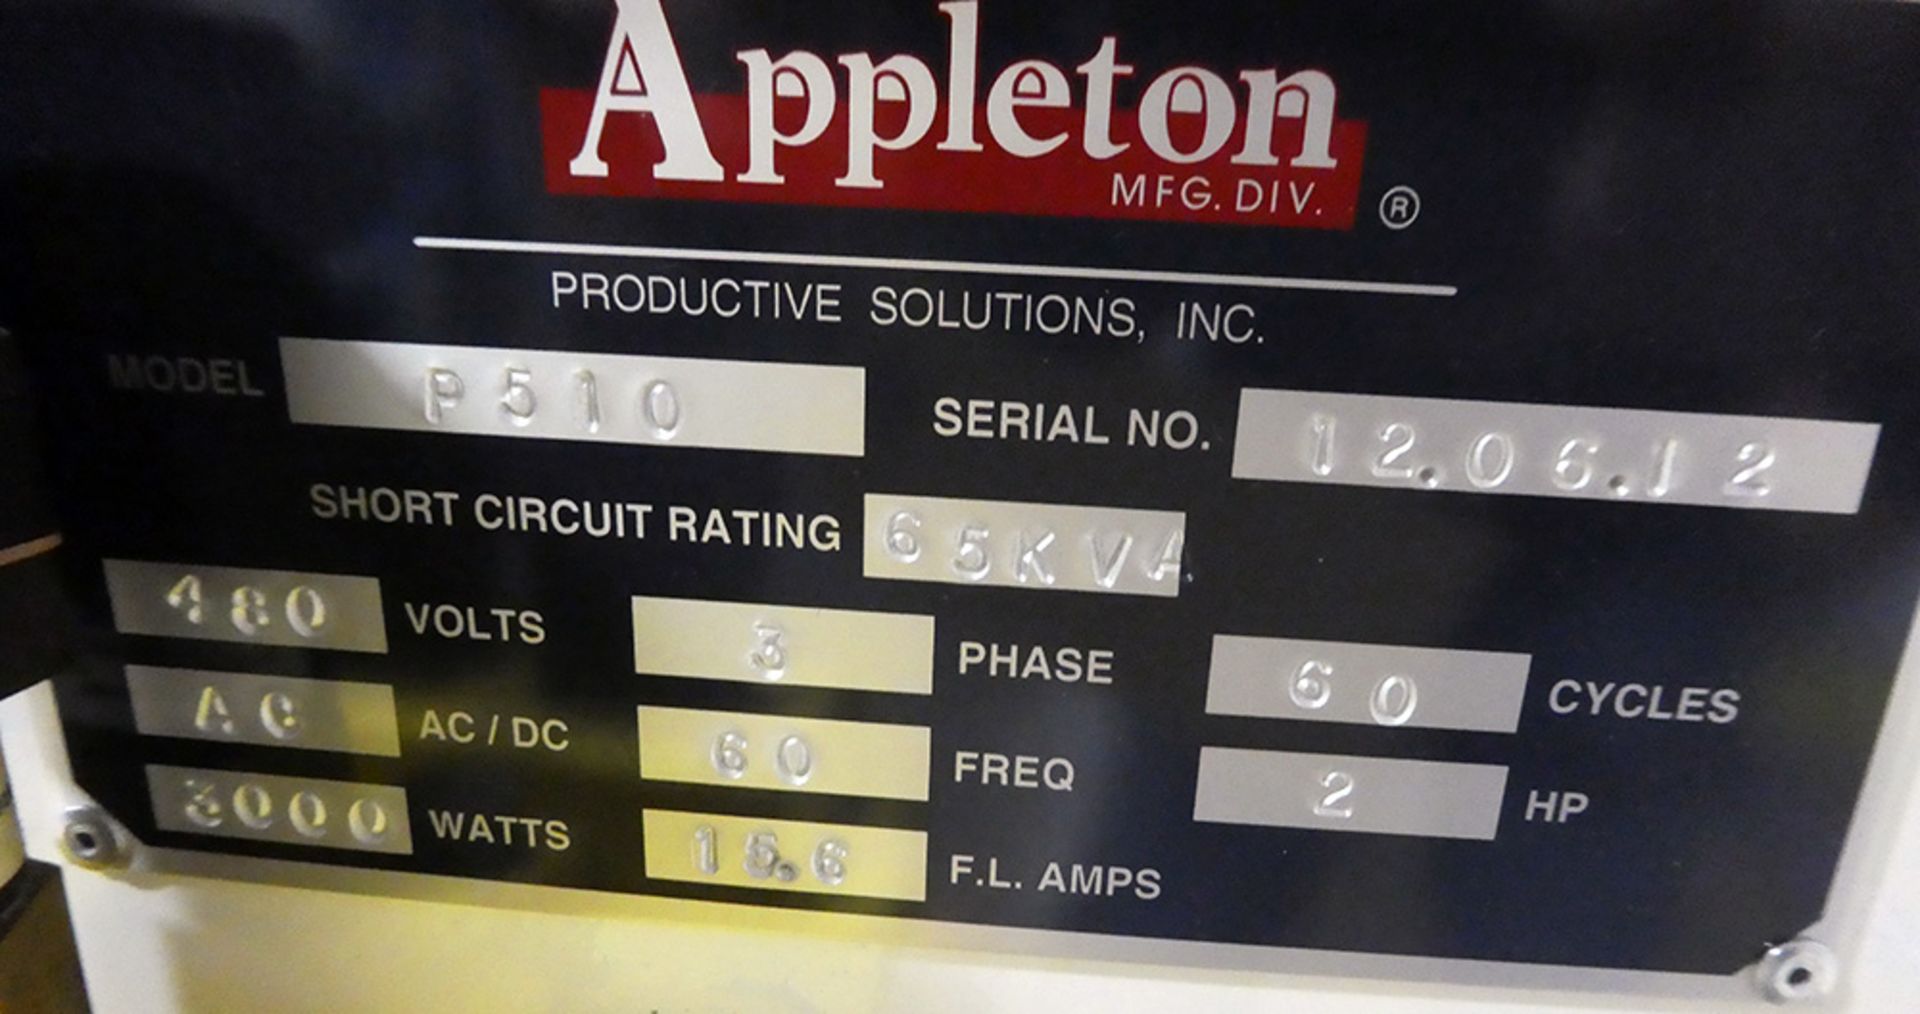 2012 120" Appleton Model P510 Programmable Automatic Core Cutter - Image 12 of 12